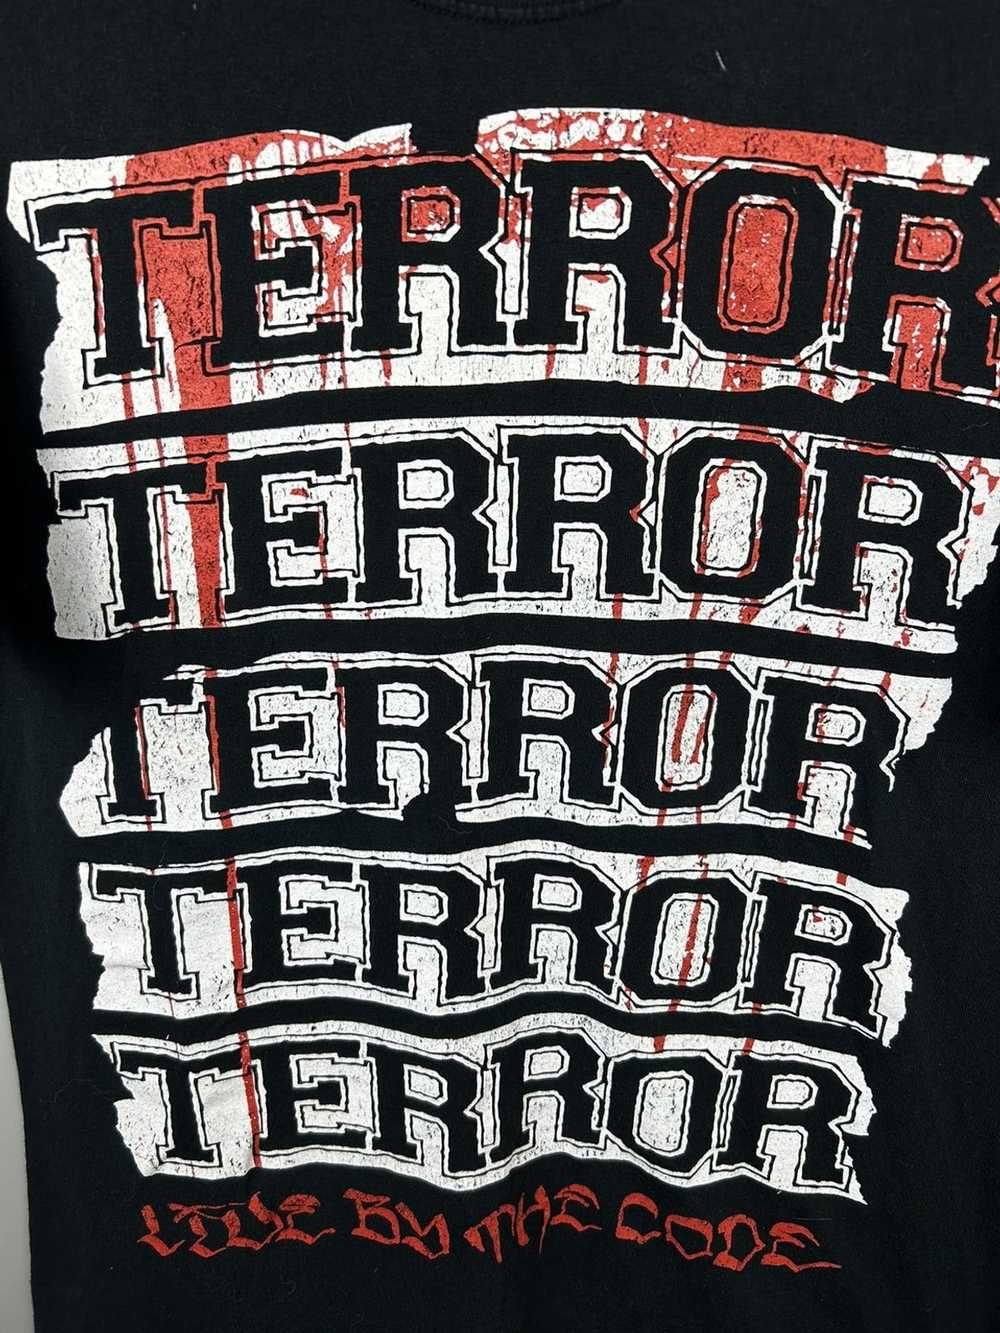 Band Tees × Tour Tee × Vintage Terror live by the… - image 2